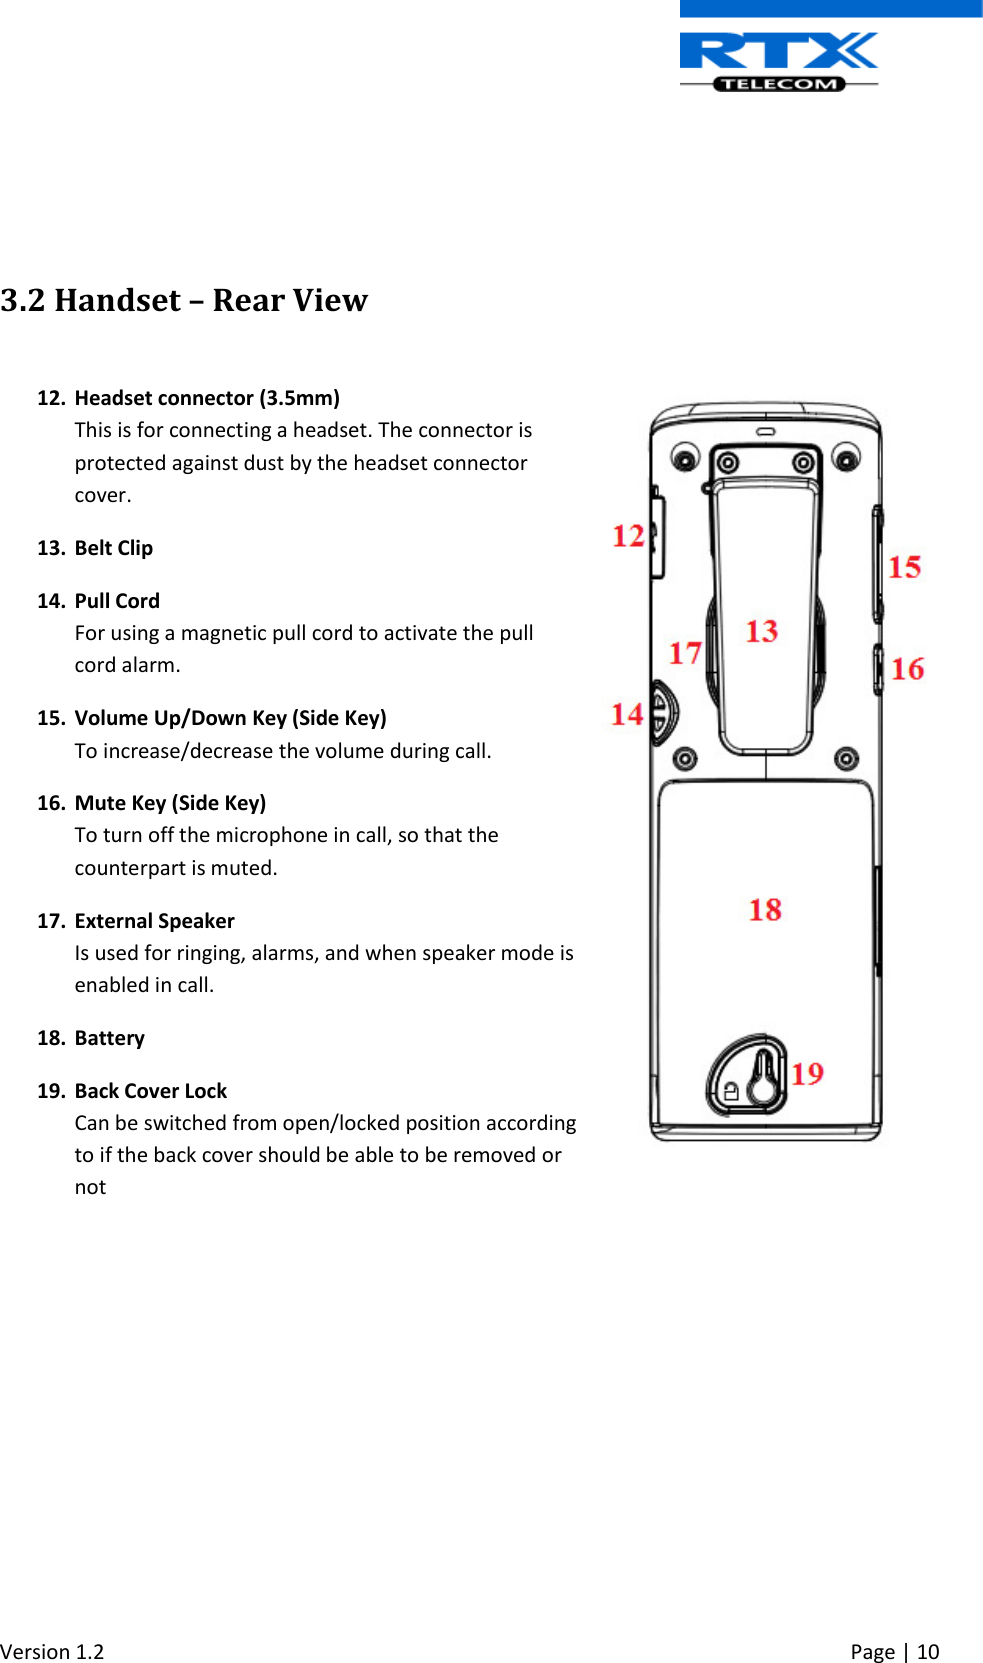  Version 1.2     Page | 10      3.2 Handset – Rear View   12. Headset connector (3.5mm) This is for connecting a headset. The connector is protected against dust by the headset connector cover. 13. Belt Clip 14. Pull Cord For using a magnetic pull cord to activate the pull cord alarm. 15. Volume Up/Down Key (Side Key) To increase/decrease the volume during call. 16. Mute Key (Side Key) To turn off the microphone in call, so that the counterpart is muted. 17. External Speaker  Is used for ringing, alarms, and when speaker mode is enabled in call. 18. Battery 19. Back Cover Lock Can be switched from open/locked position according to if the back cover should be able to be removed or not          